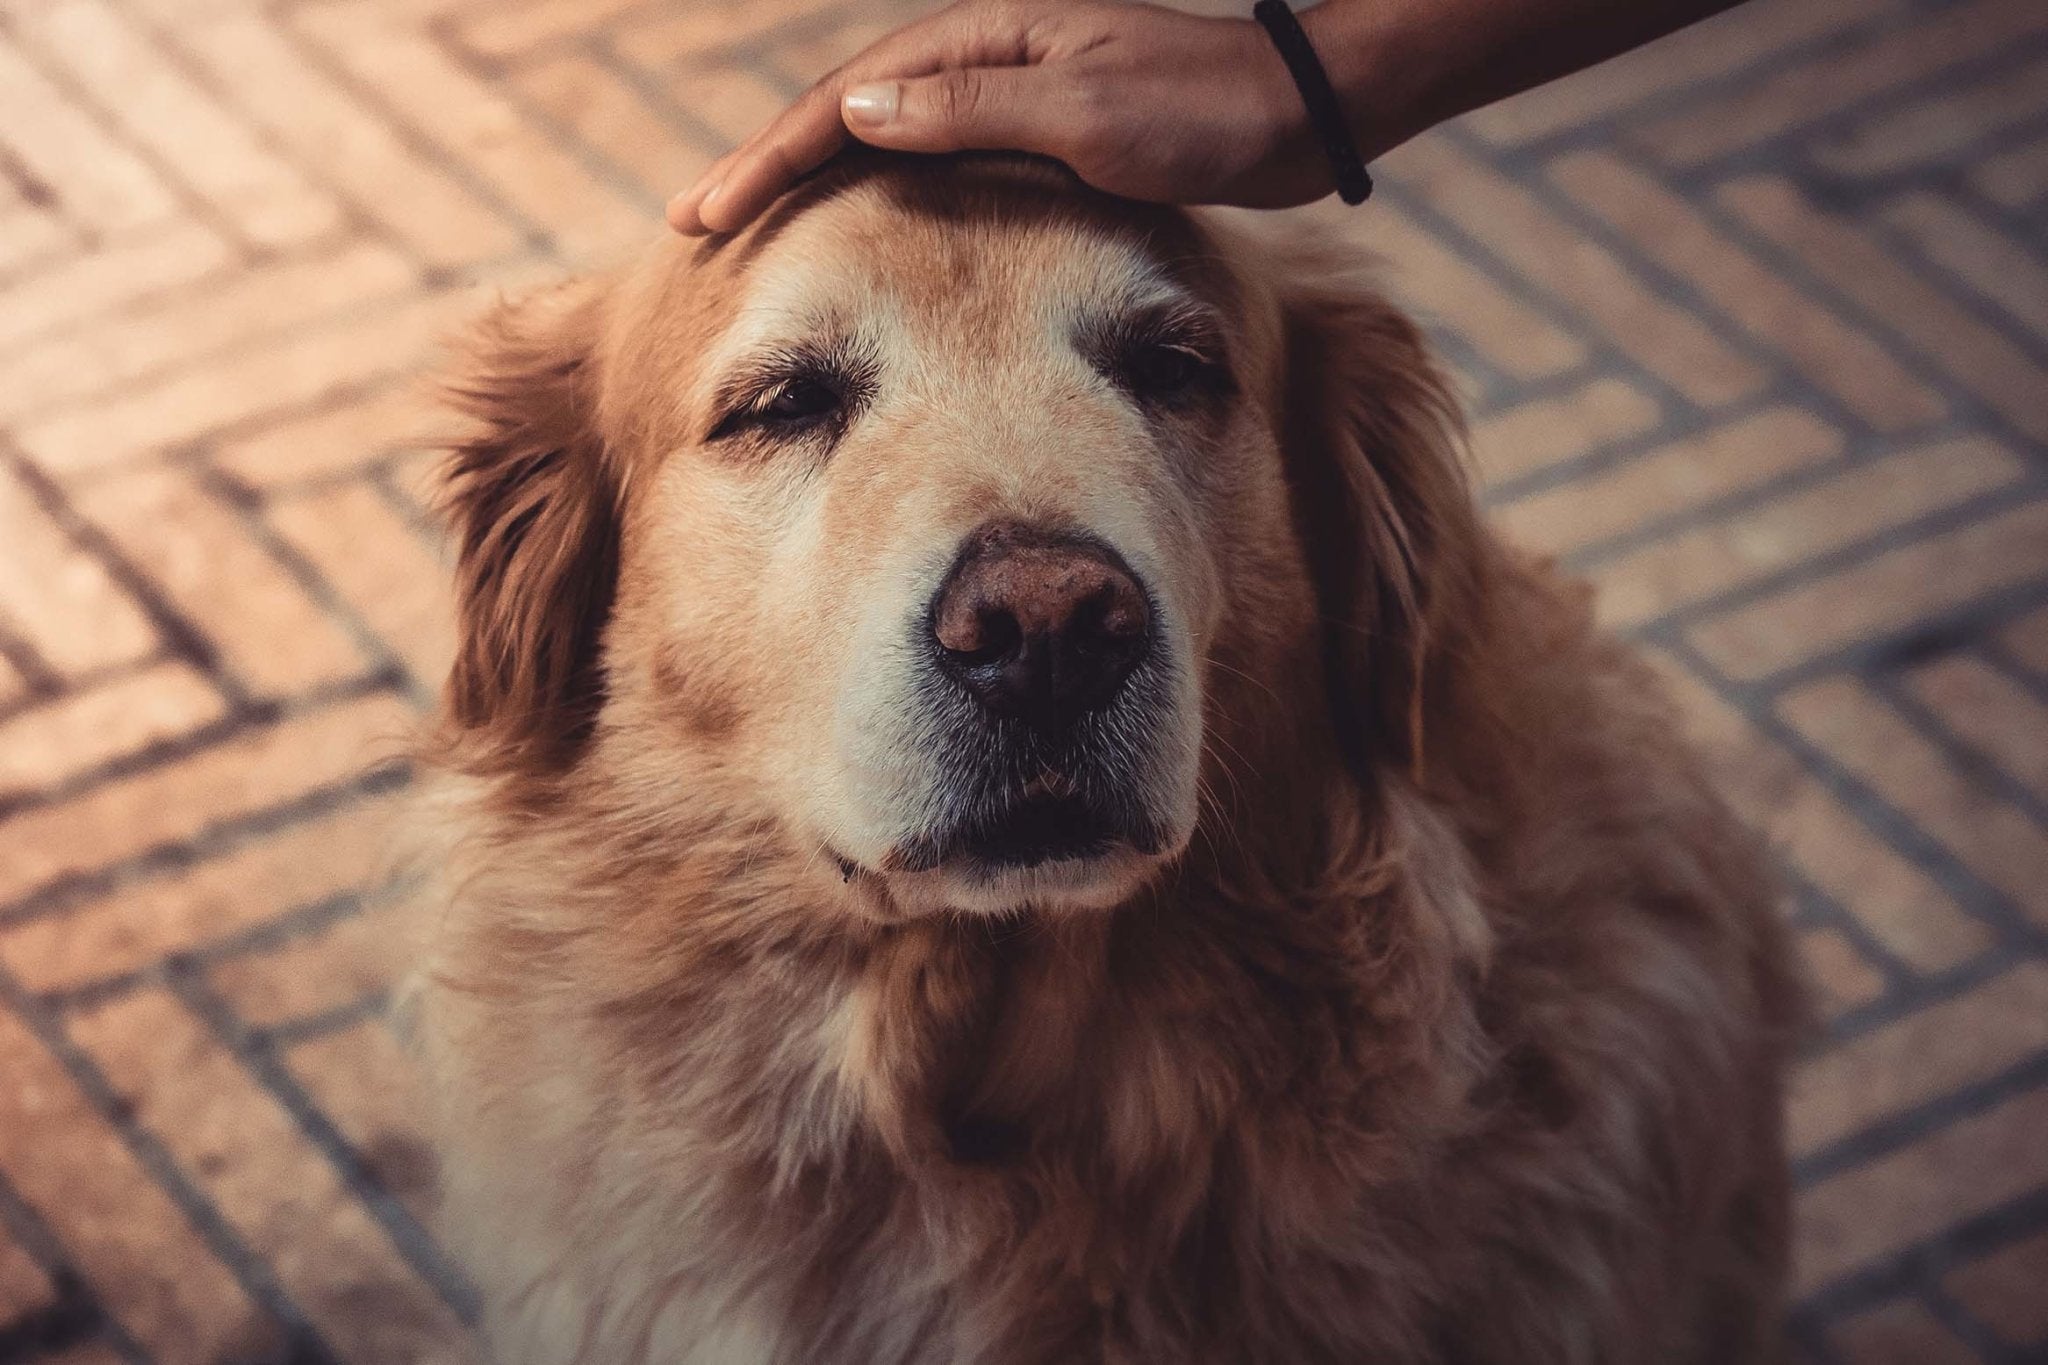 10 Ways to Make Life Better for Your Aging Dog